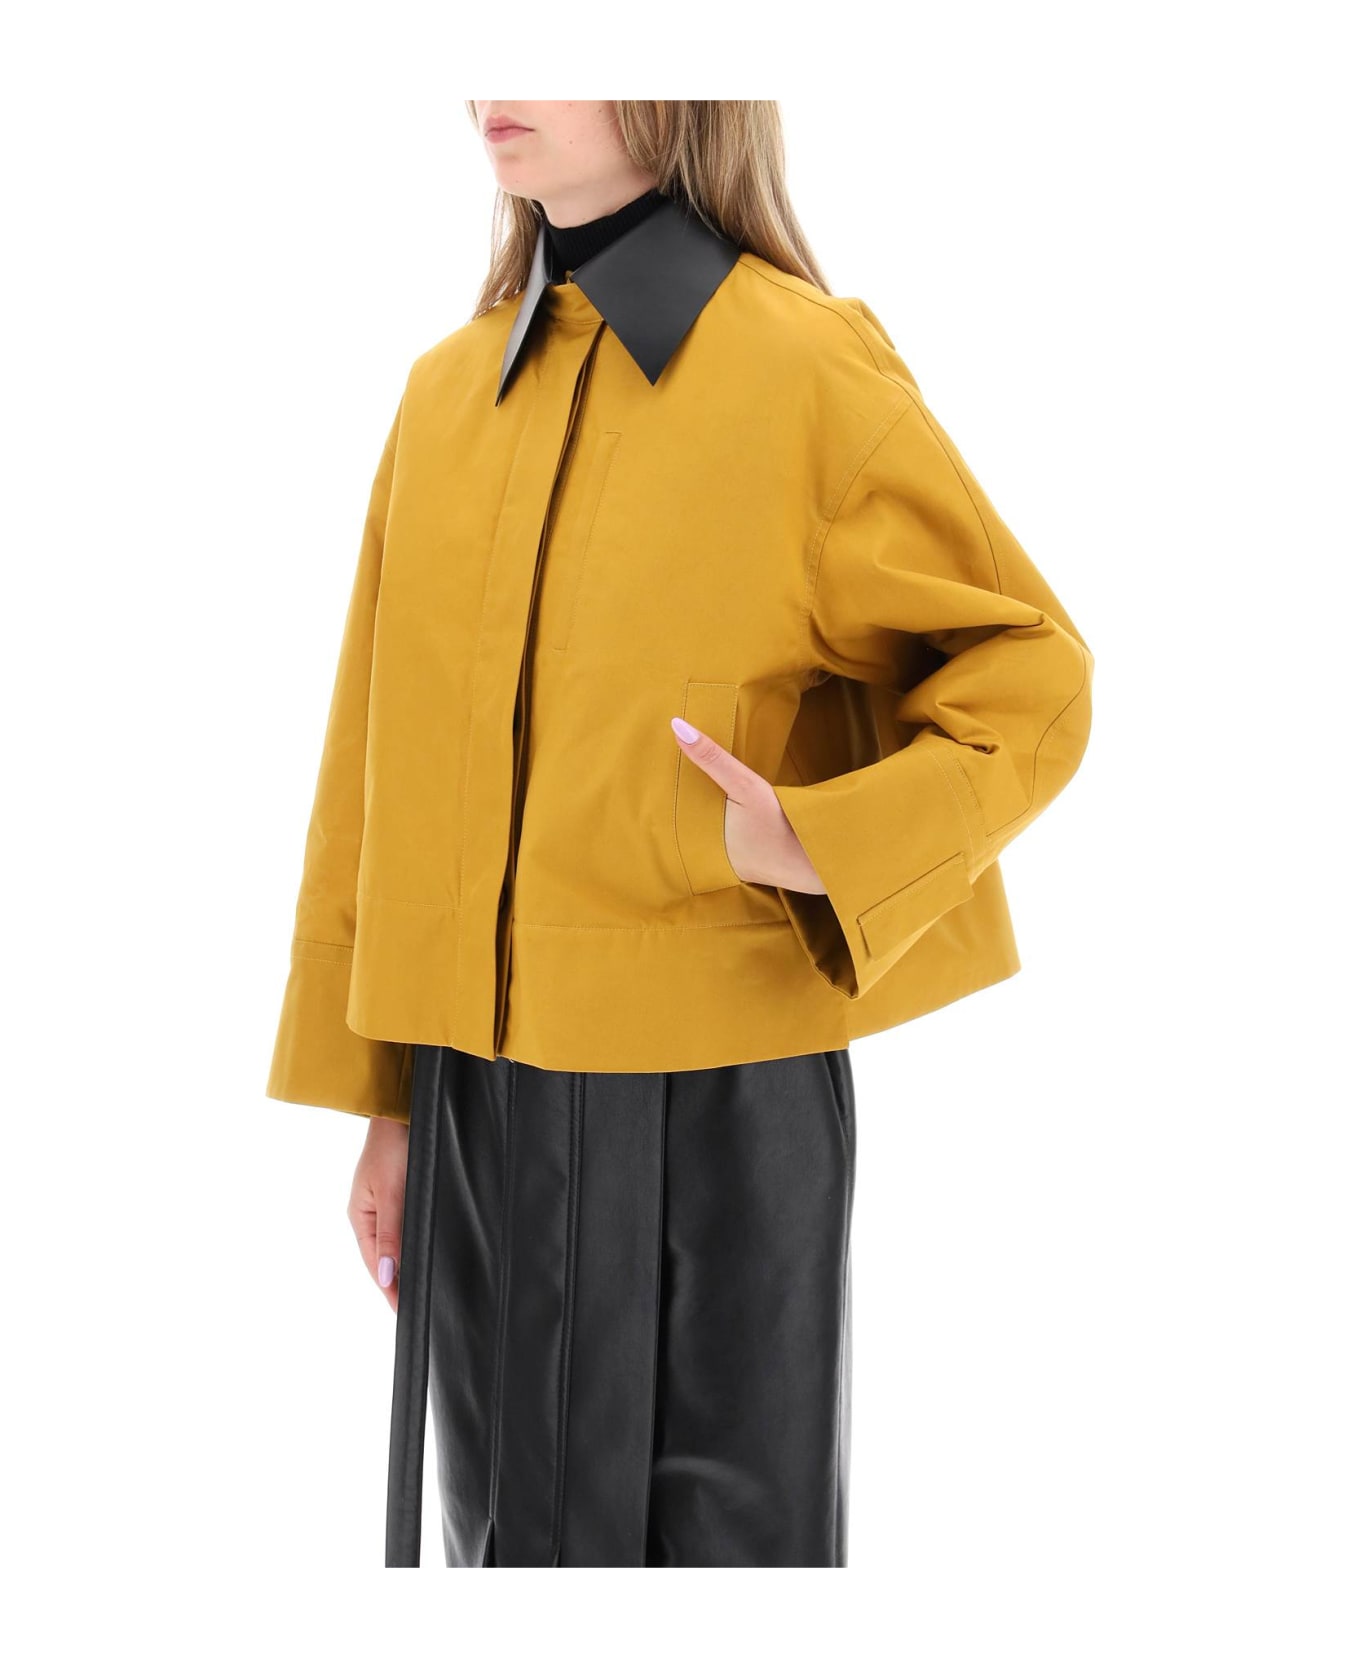 Jil Sander Jacket With Leather Collar - MUSTARD (Yellow)